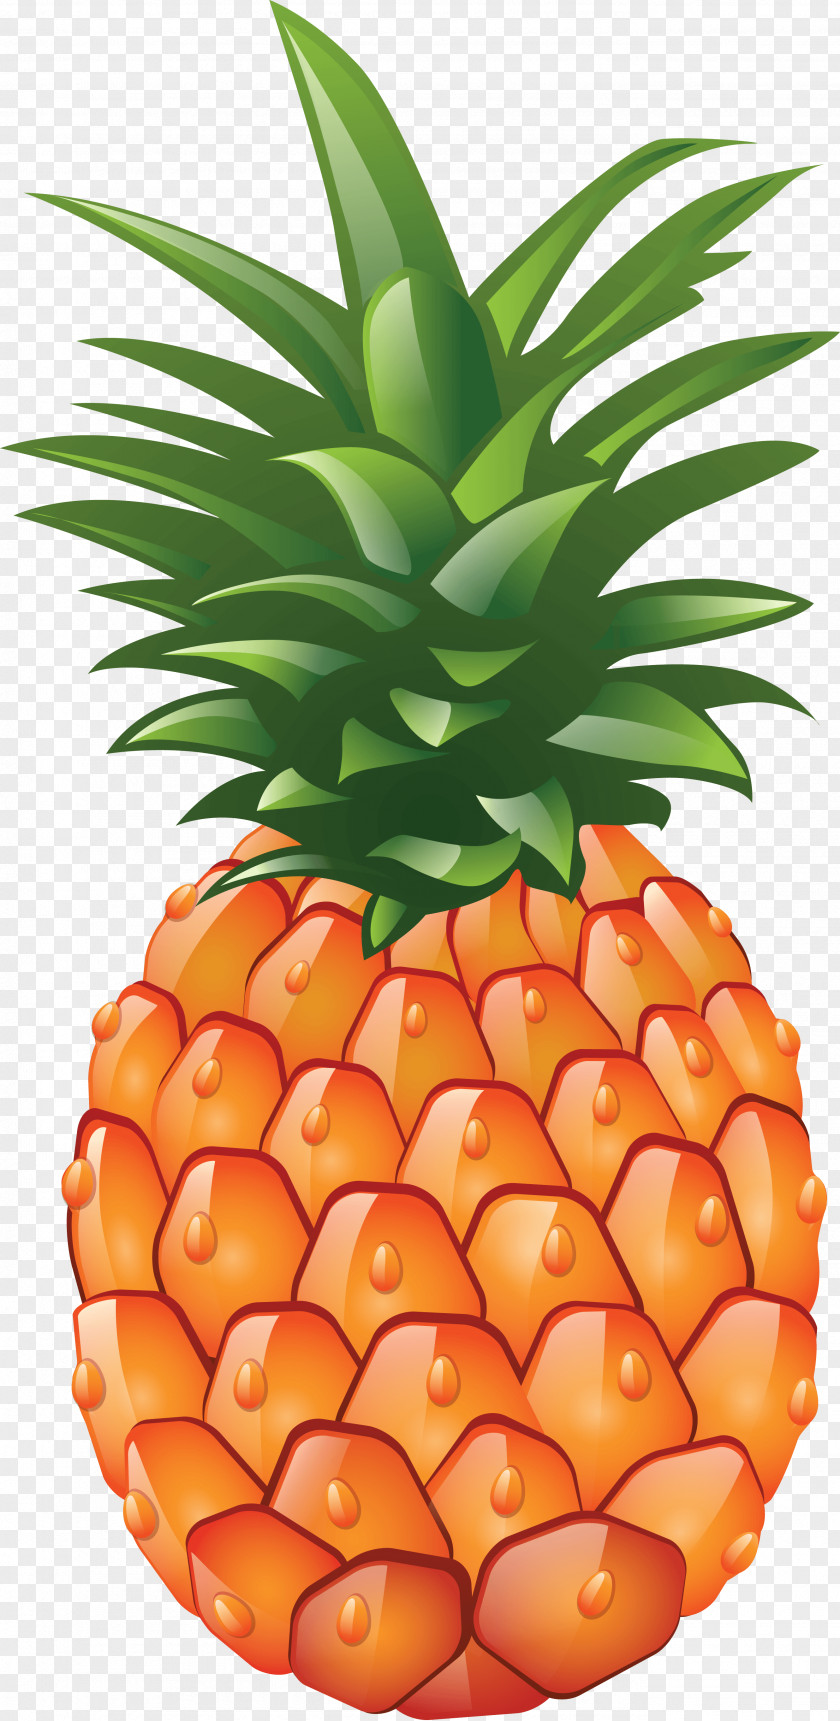 Pineapple Image Download Clip Art PNG